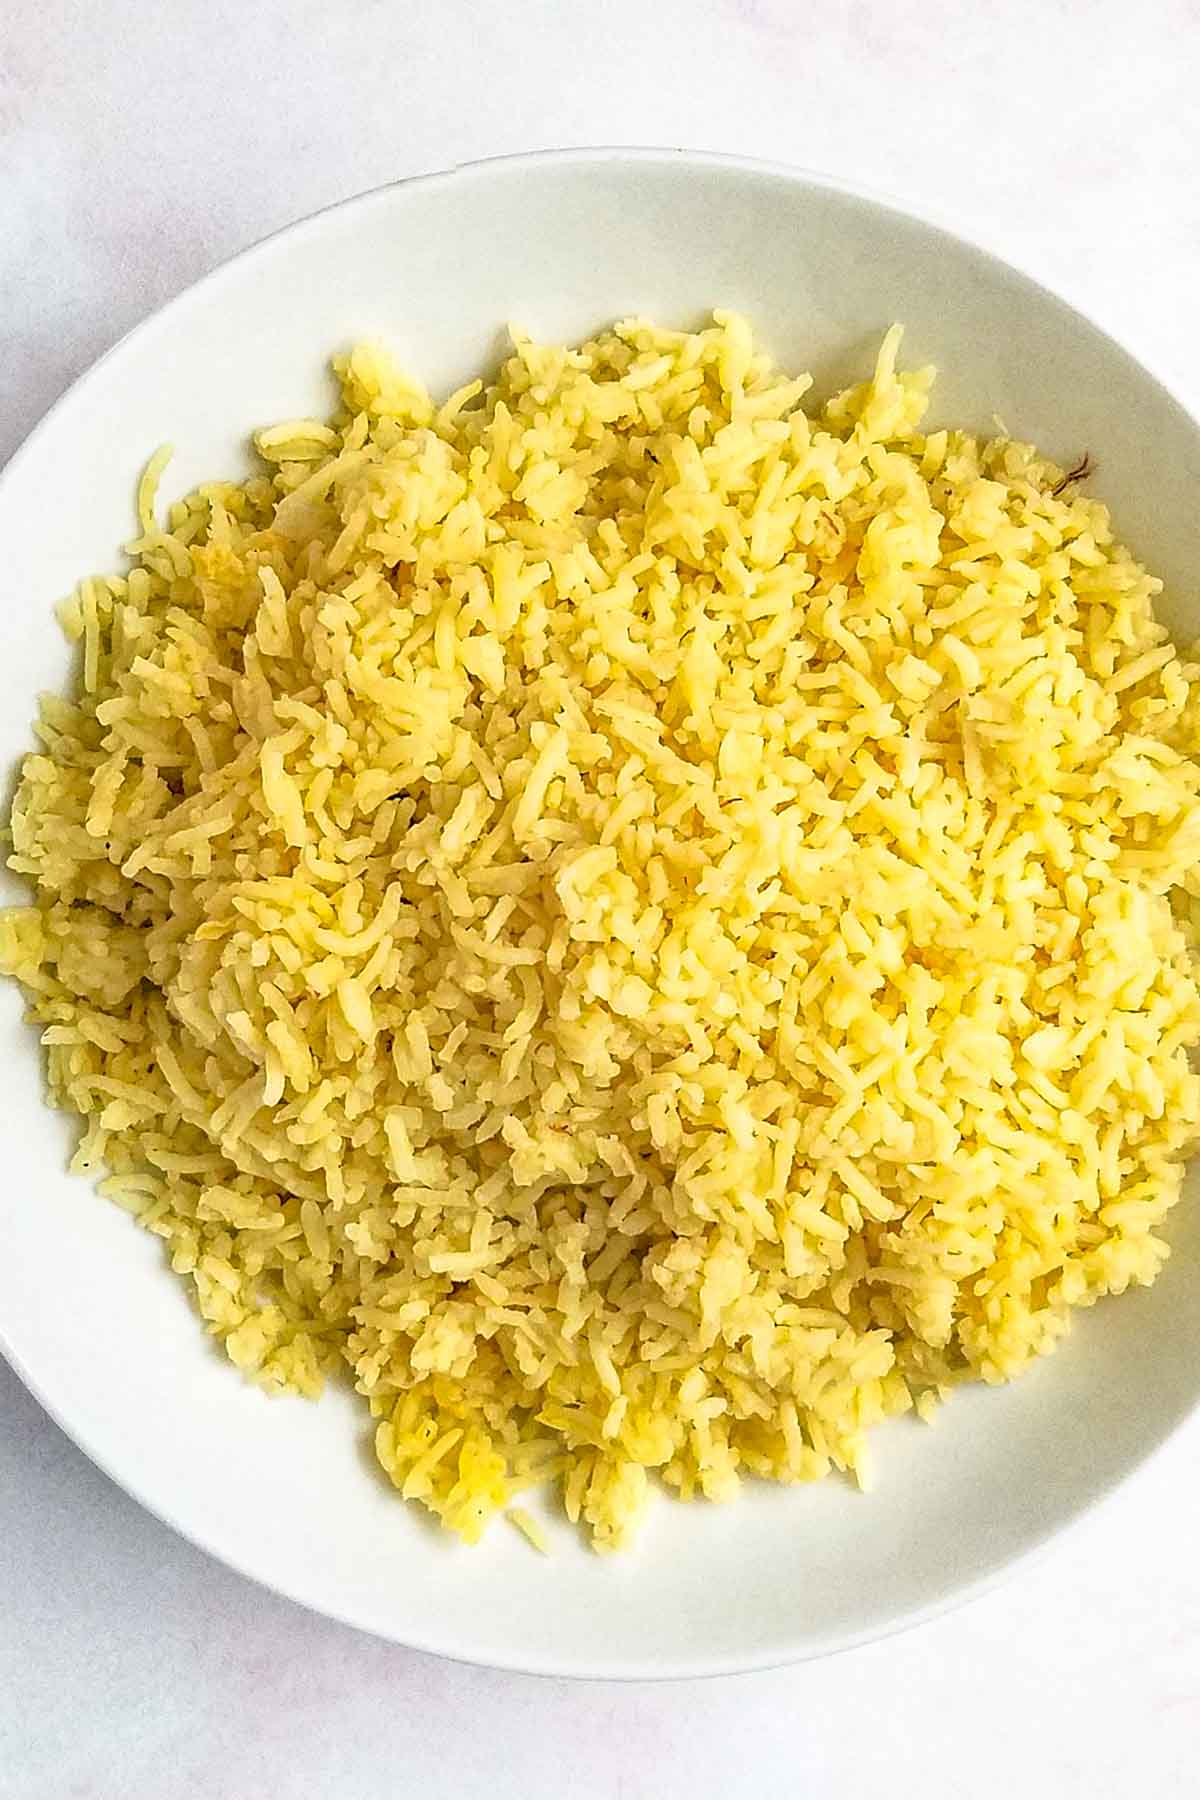 Yellow saffron rice in a serving bowl.